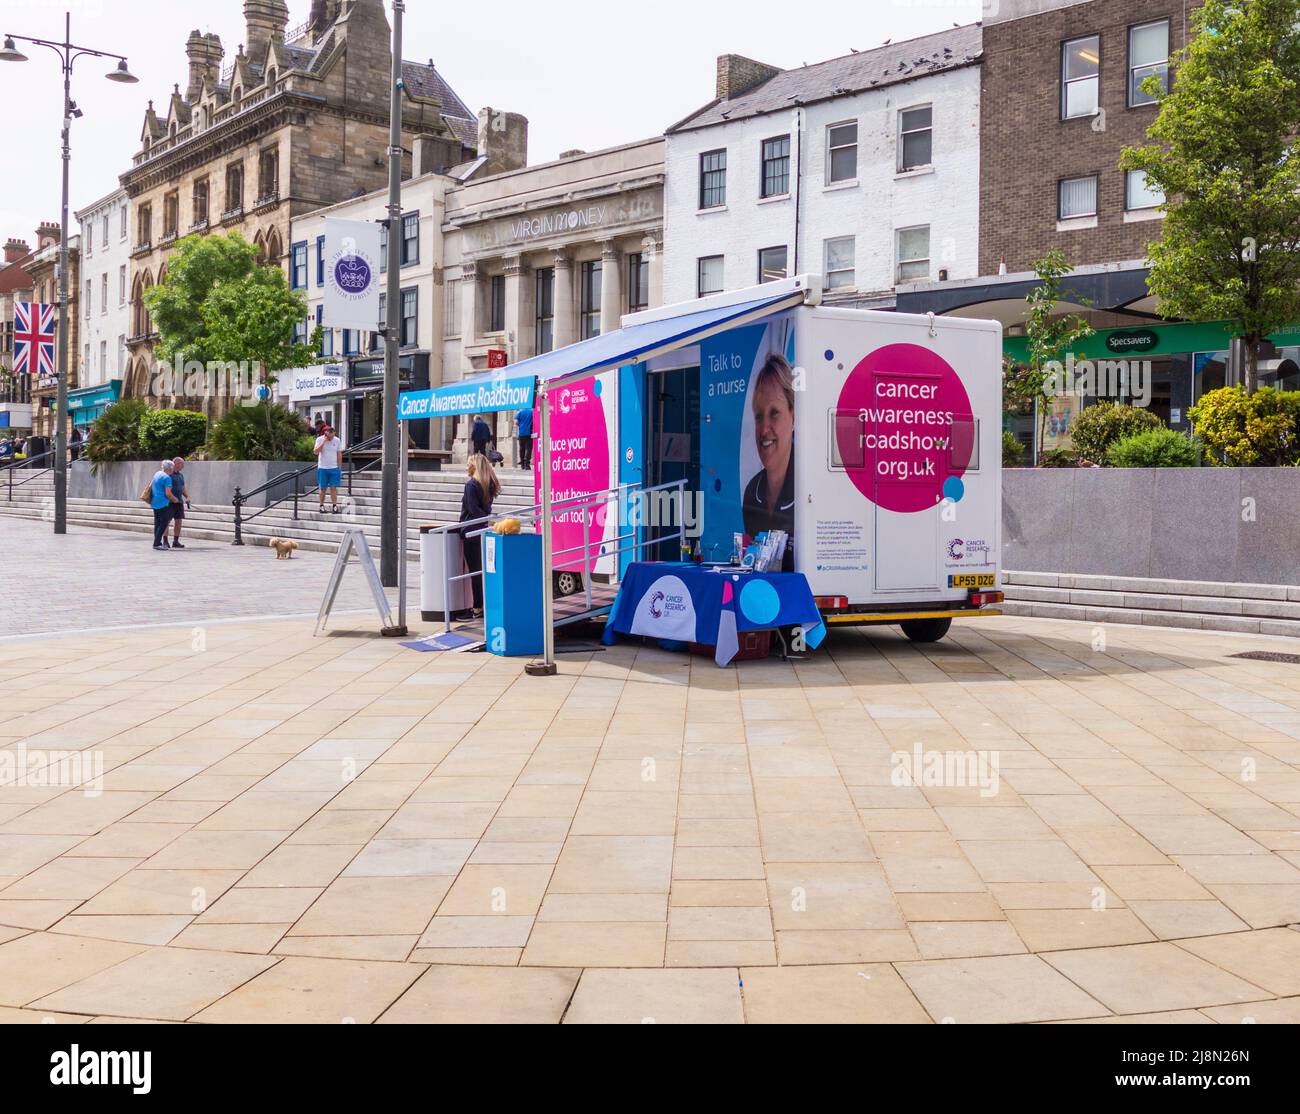 Cancer Awareness Roadshow vehicle in the town centre in Darlington,England,UK Stock Photo